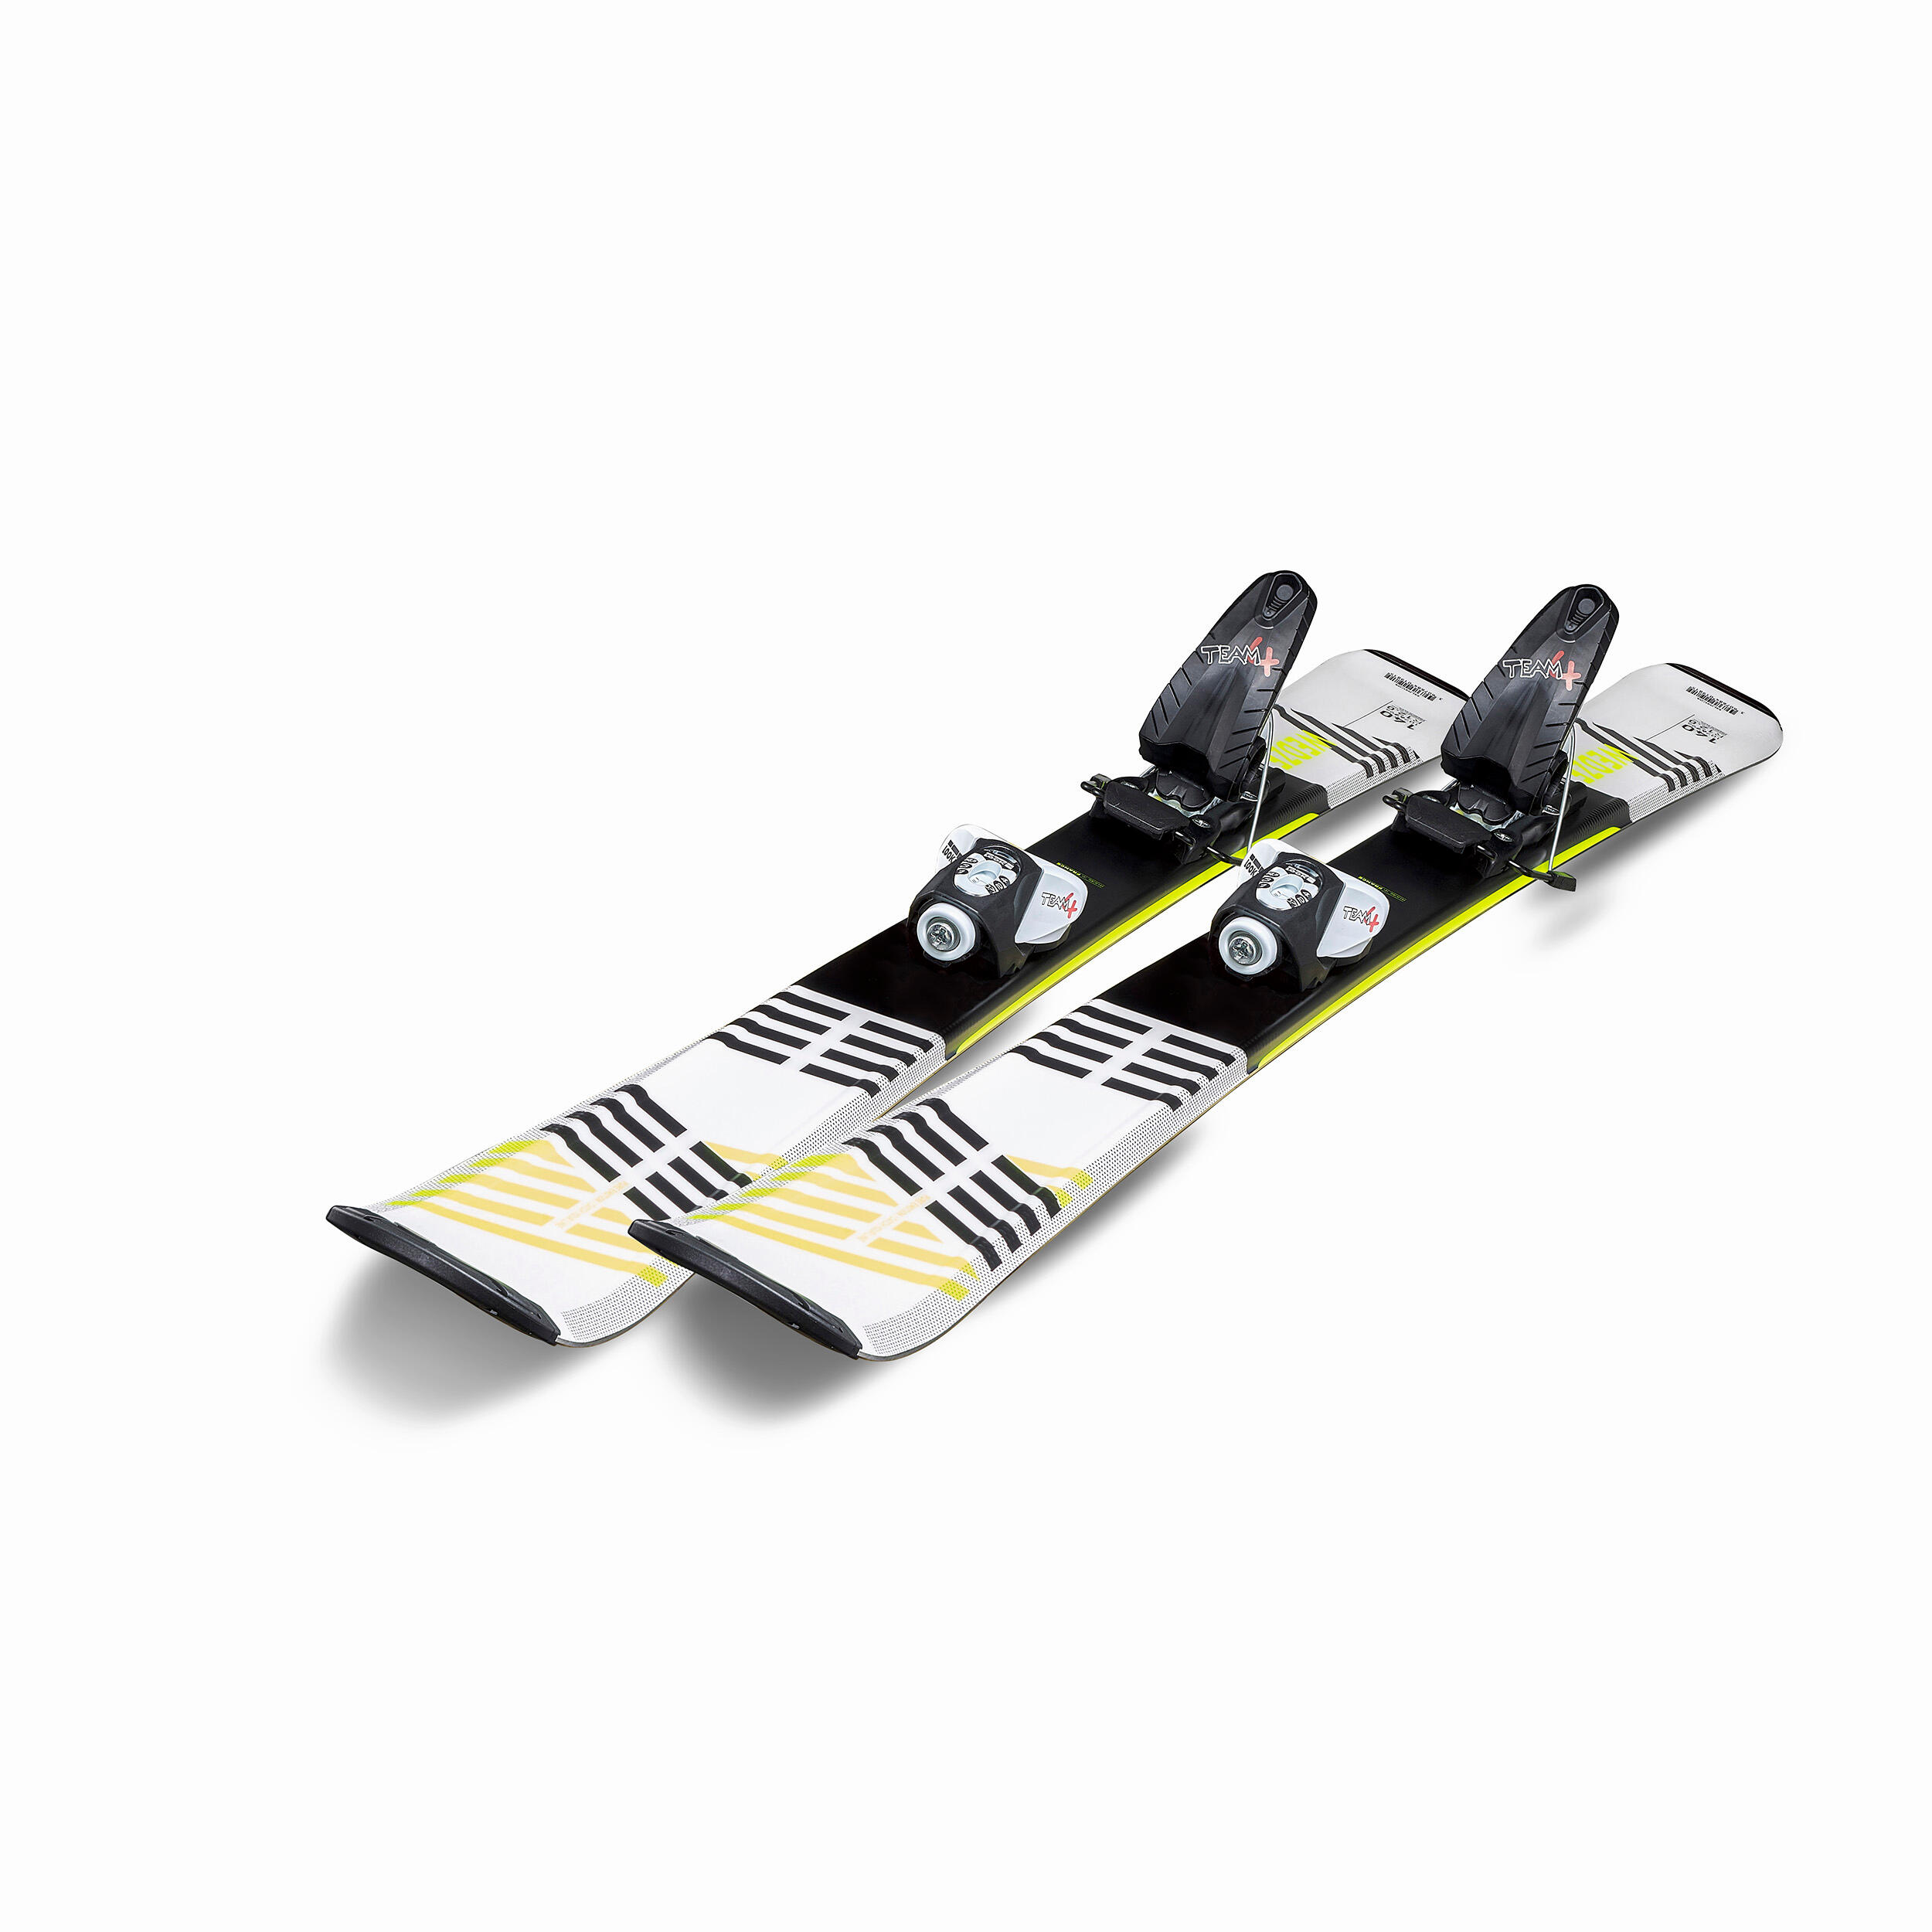 KIDS’S DOWNHILL SKIS WITH BINDING - BOOST 500 - WHITE/YELLOW 2/10